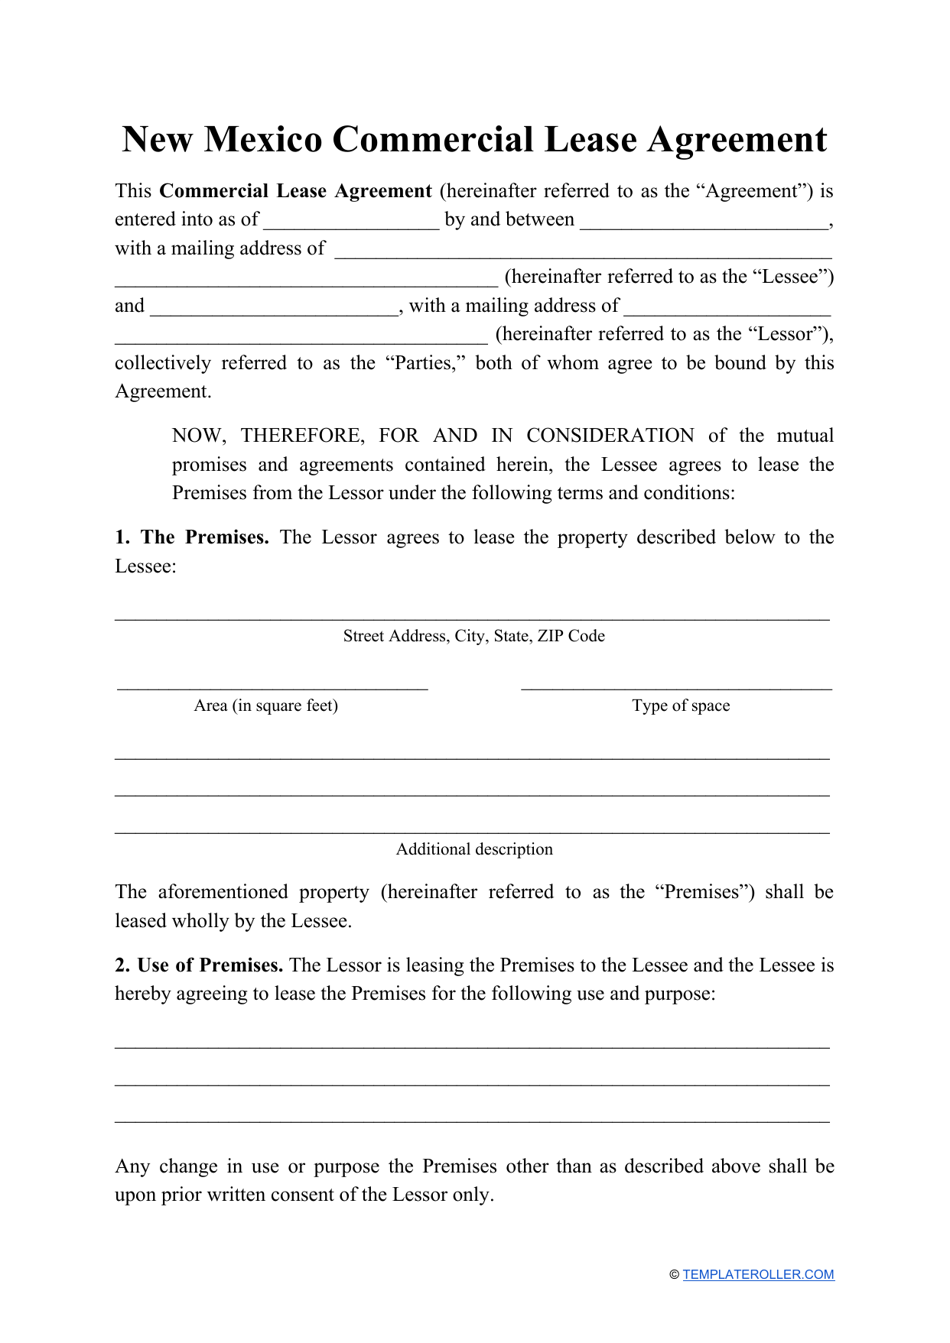 Commercial Lease Agreement Template - New Mexico, Page 1